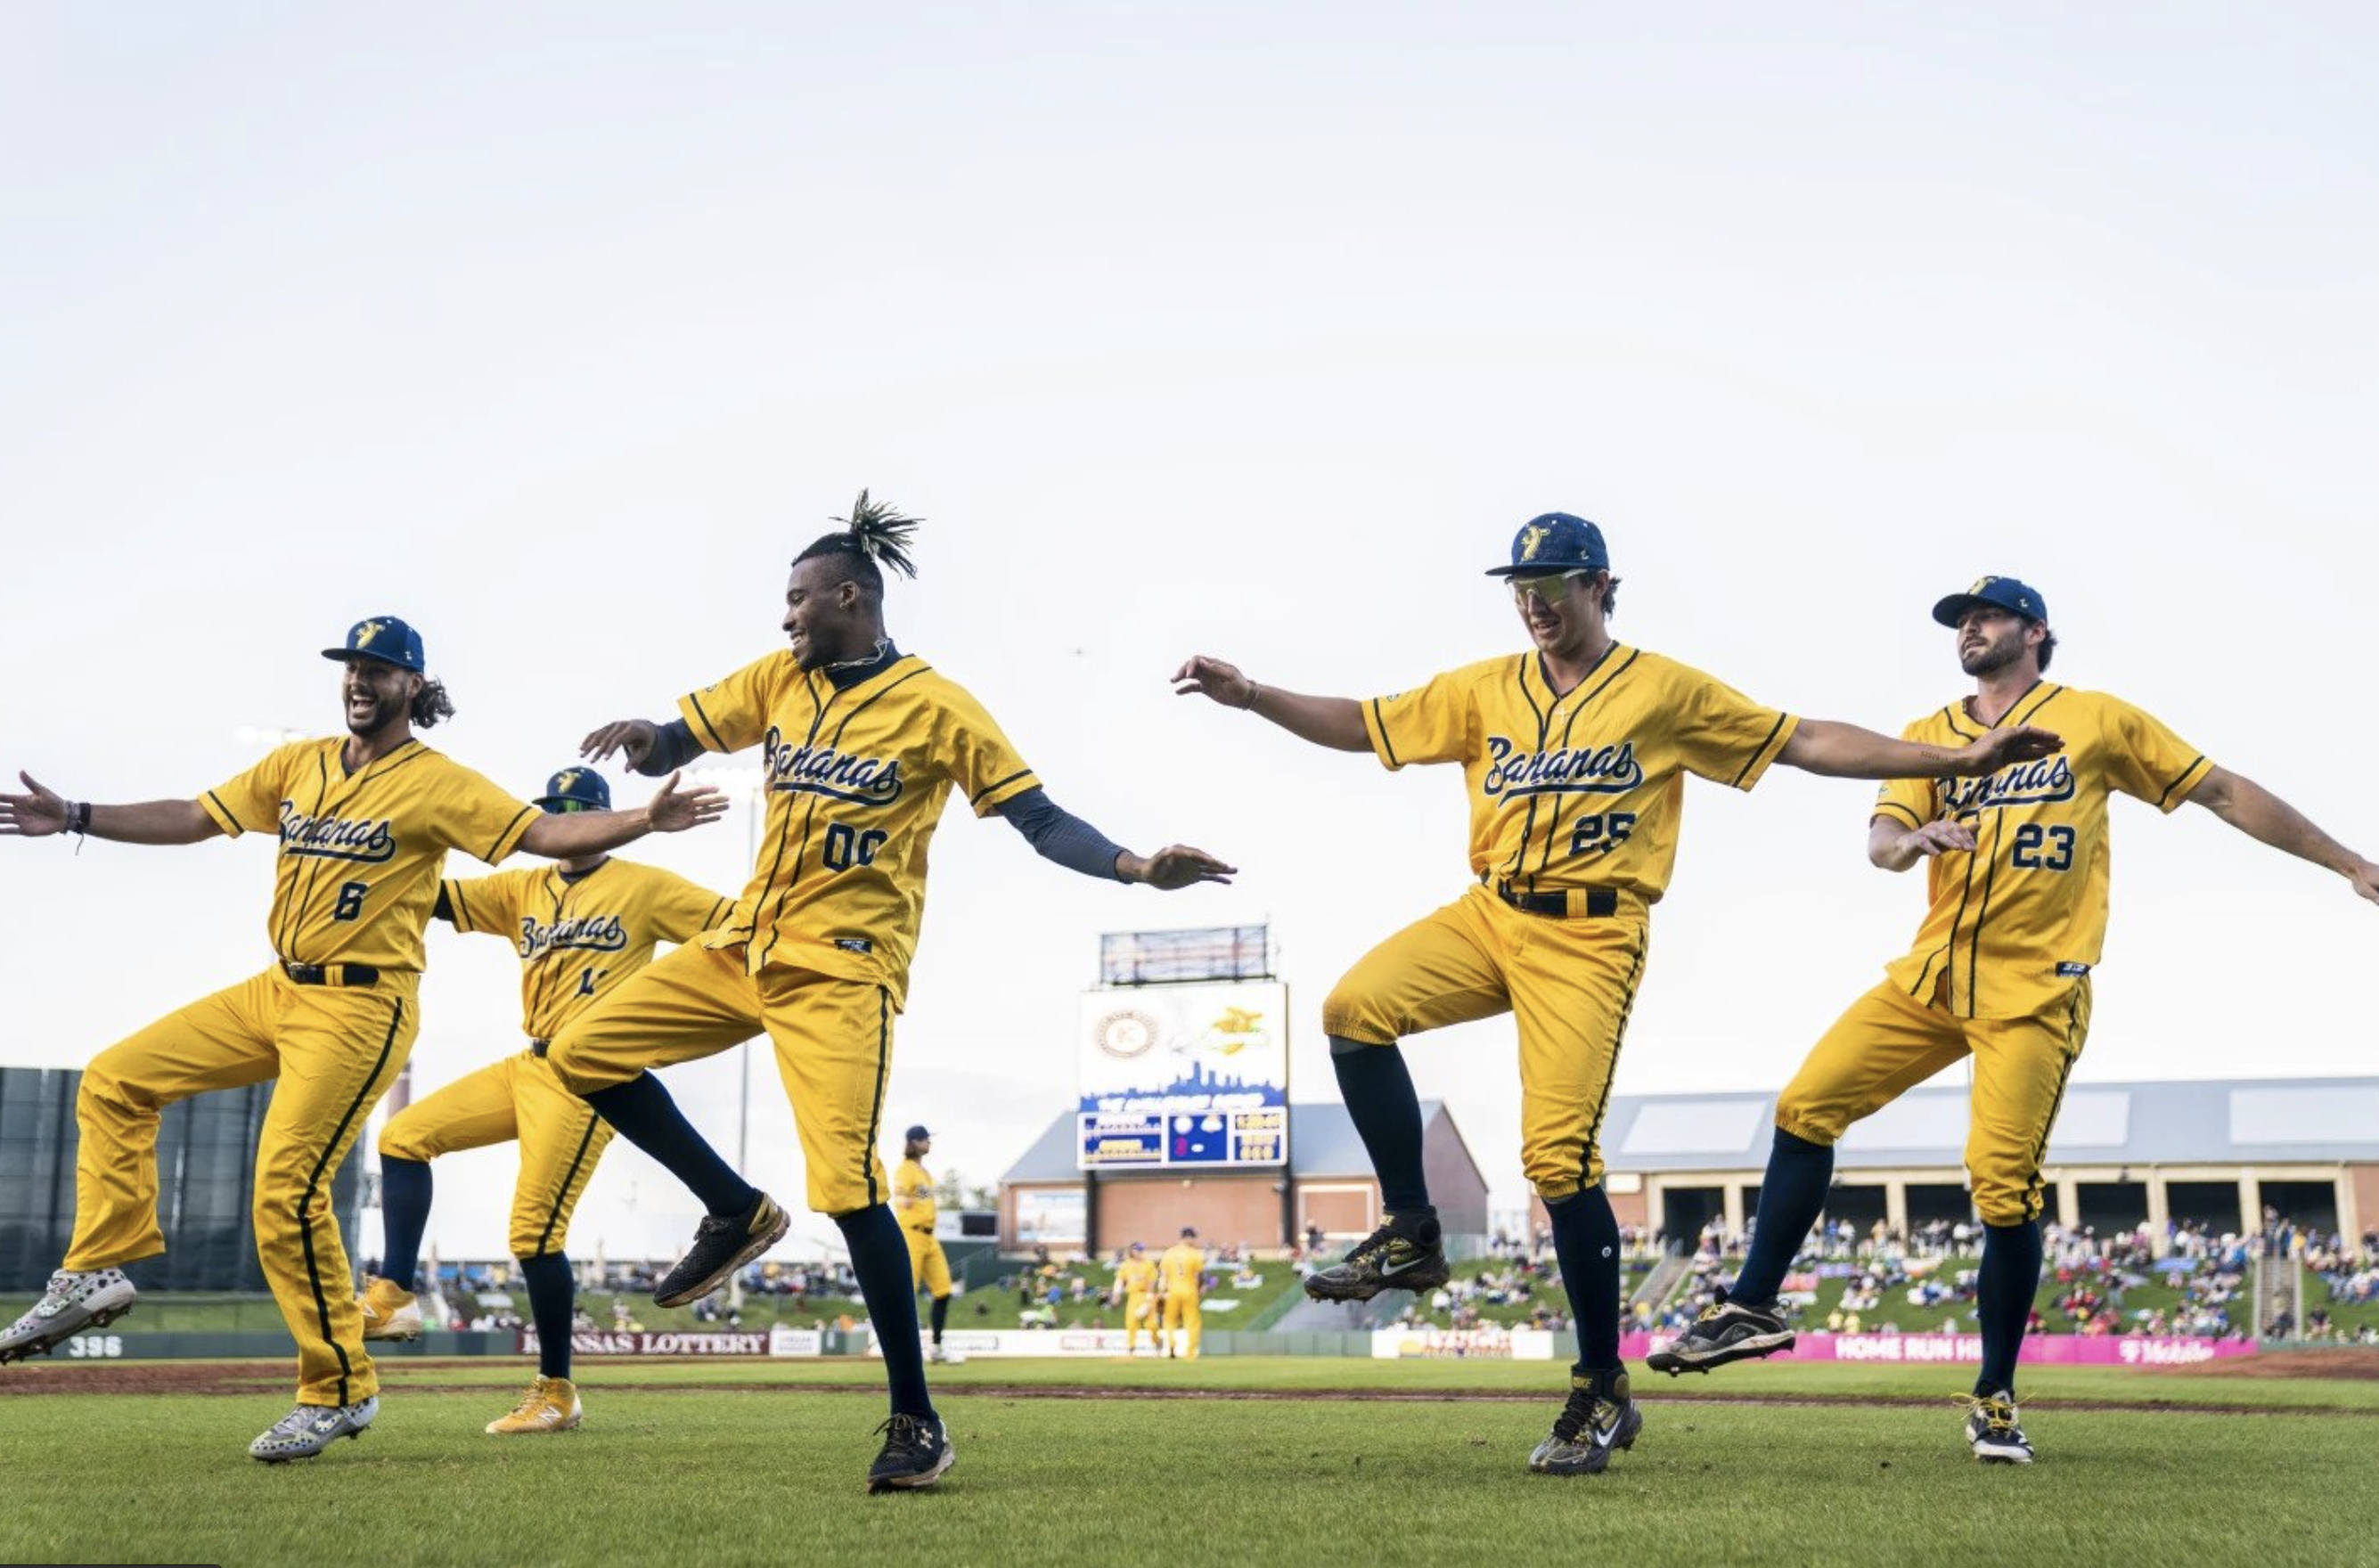 The Savannah Bananas will bring 'the greatest show in sports' to